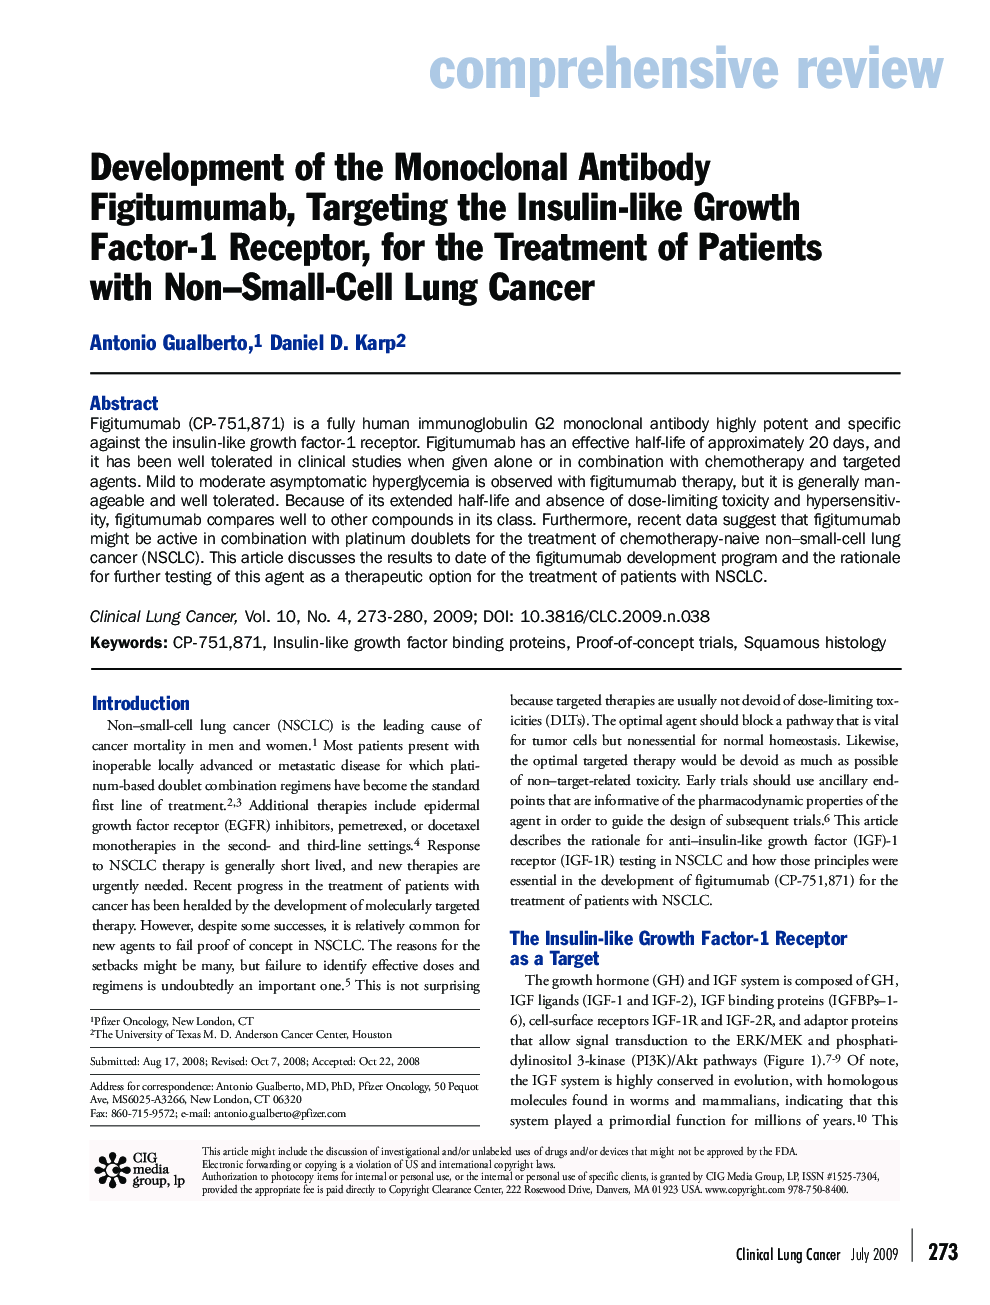 Development of the Monoclonal Antibody Figitumumab, Targeting the Insulin-like Growth Factor-1 Receptor, for the Treatment of Patients with Non–Small-Cell Lung Cancer 